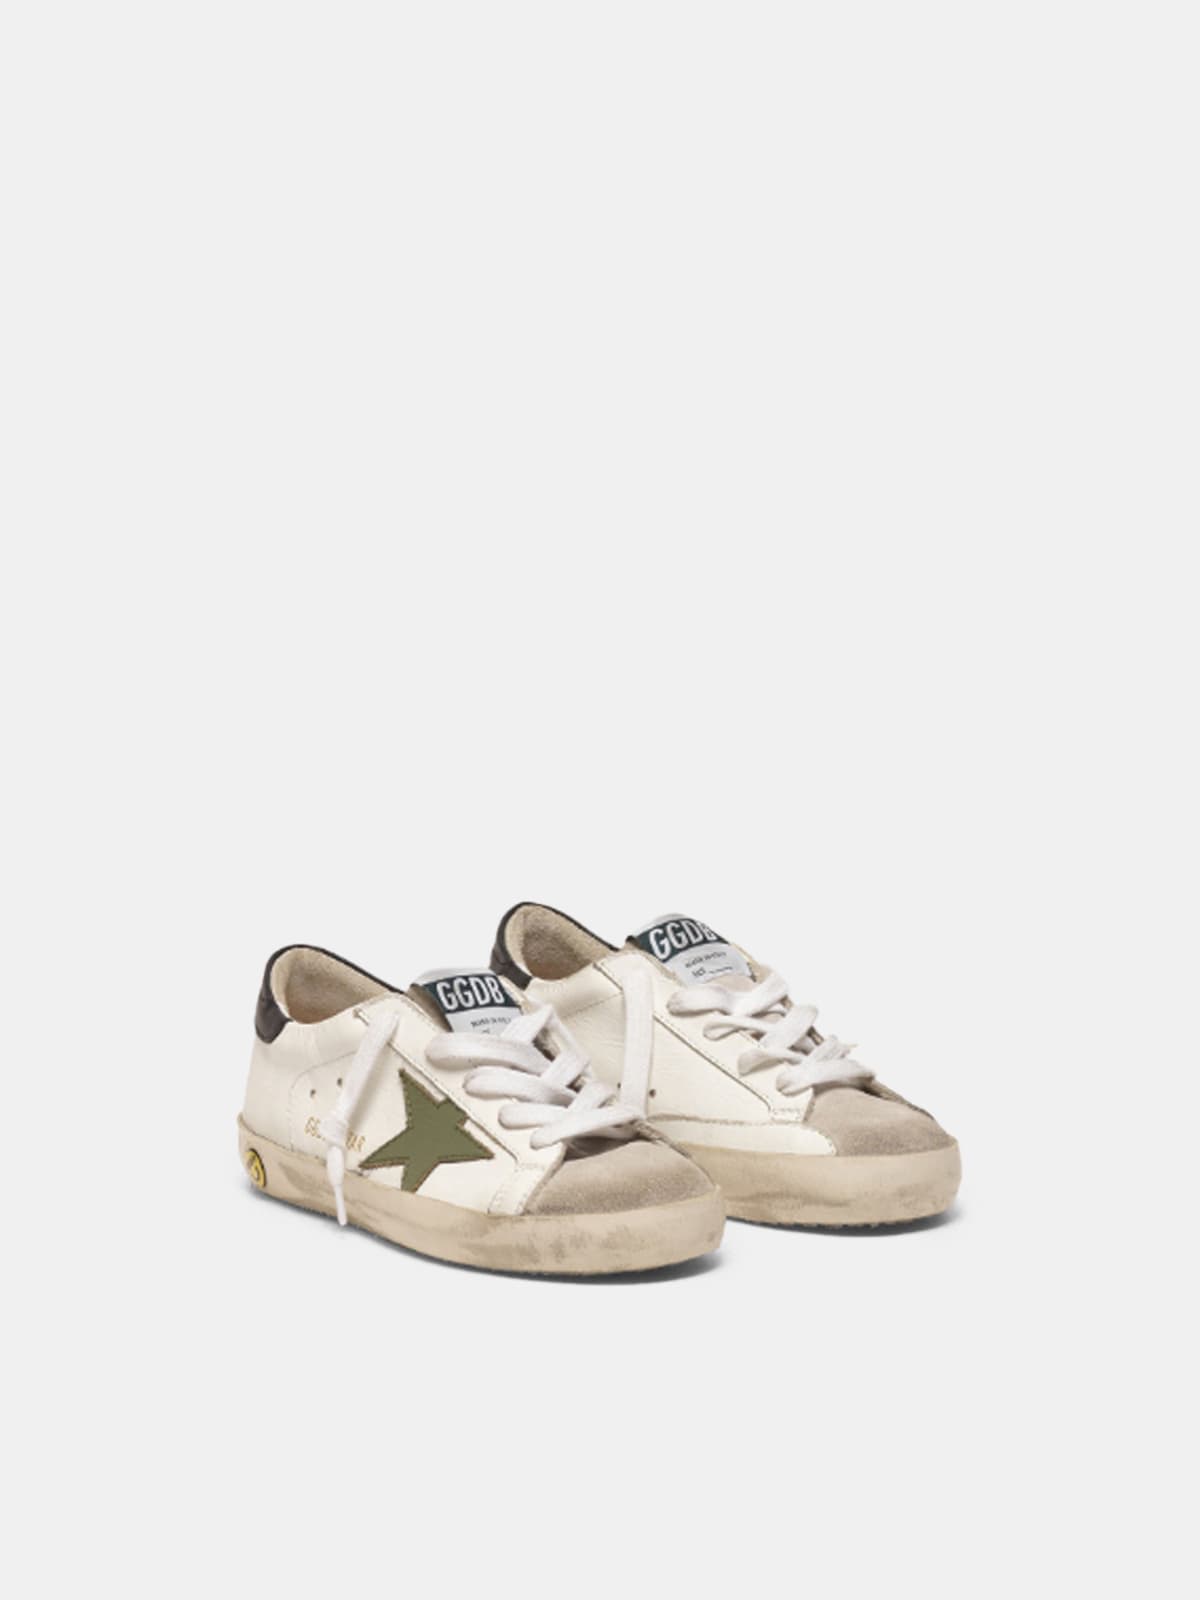 Superstar sneakers with an army green star and black heel tab